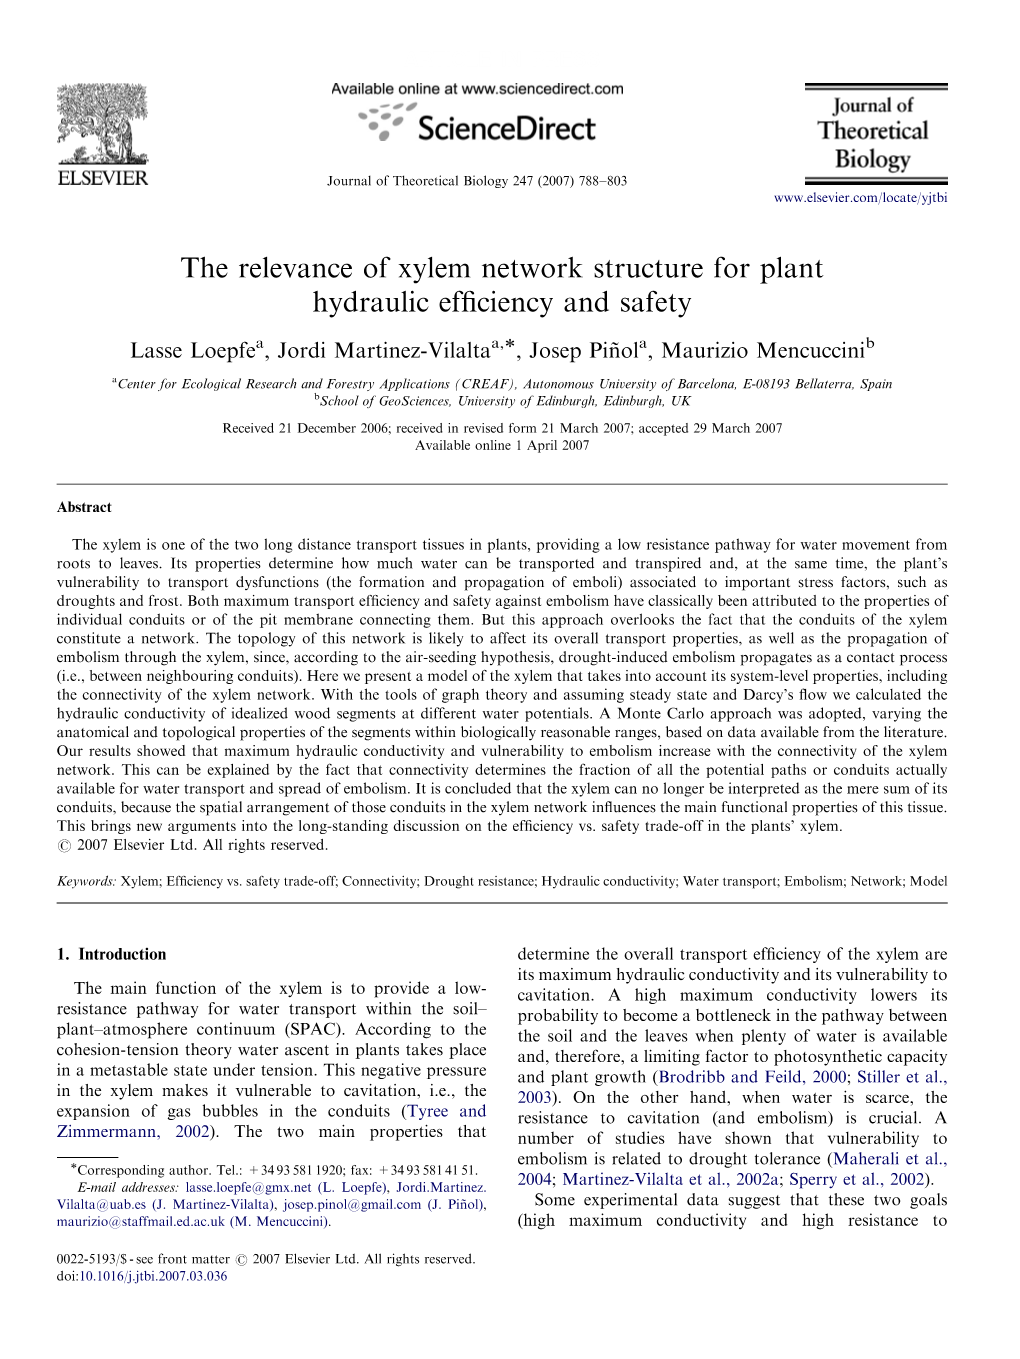 The Relevance of Xylem Network Structure for Plant Hydraulic Efﬁciency and Safety